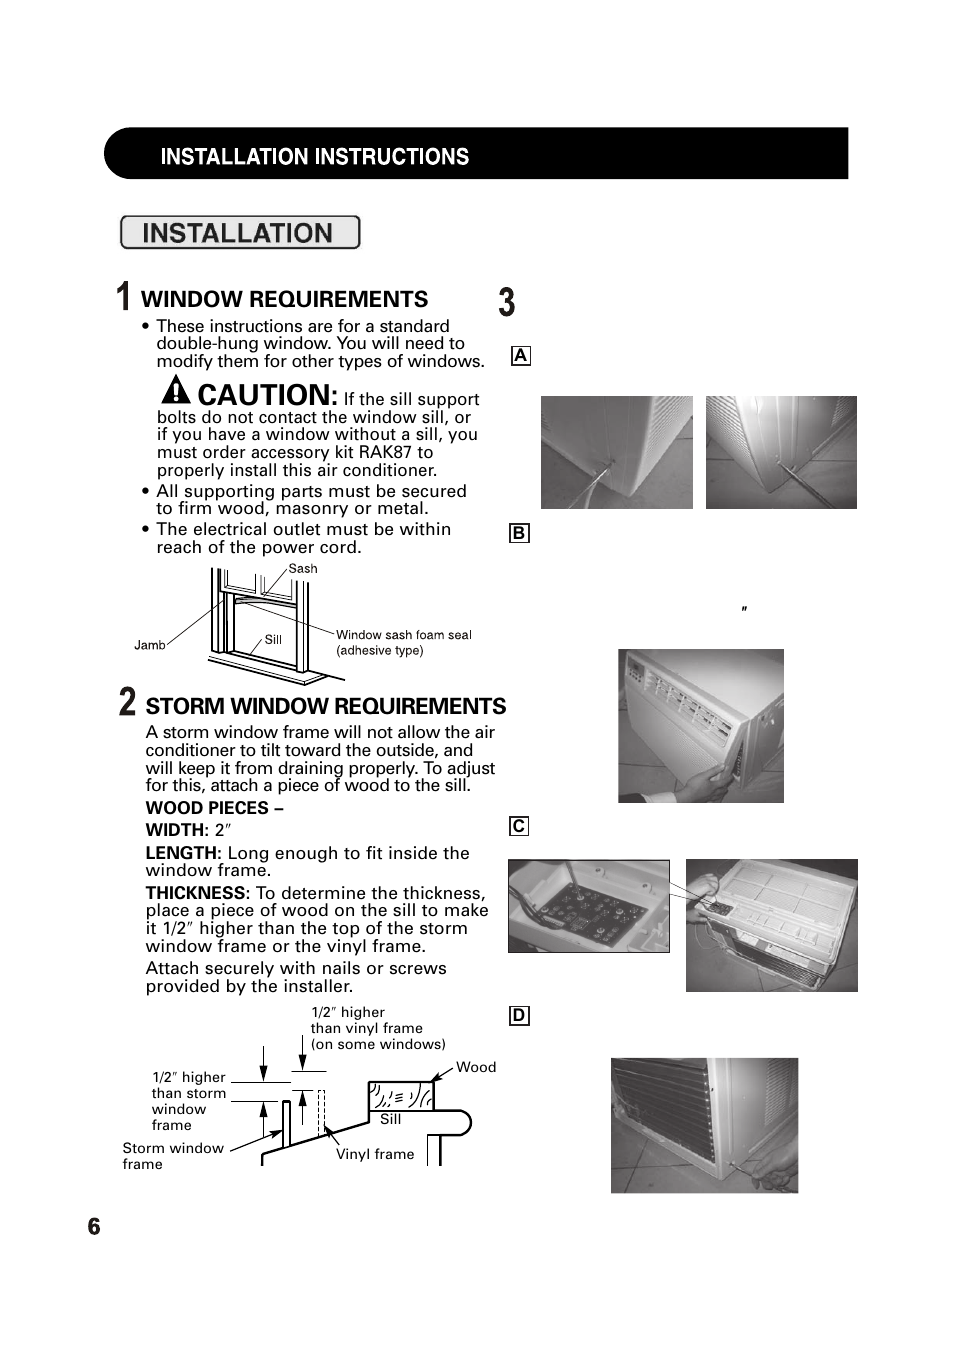 Caution, Window requirements, Storm window requirements | Remove the air conditioner from the case | Sharp AF-Q100PX User Manual | Page 6 / 21